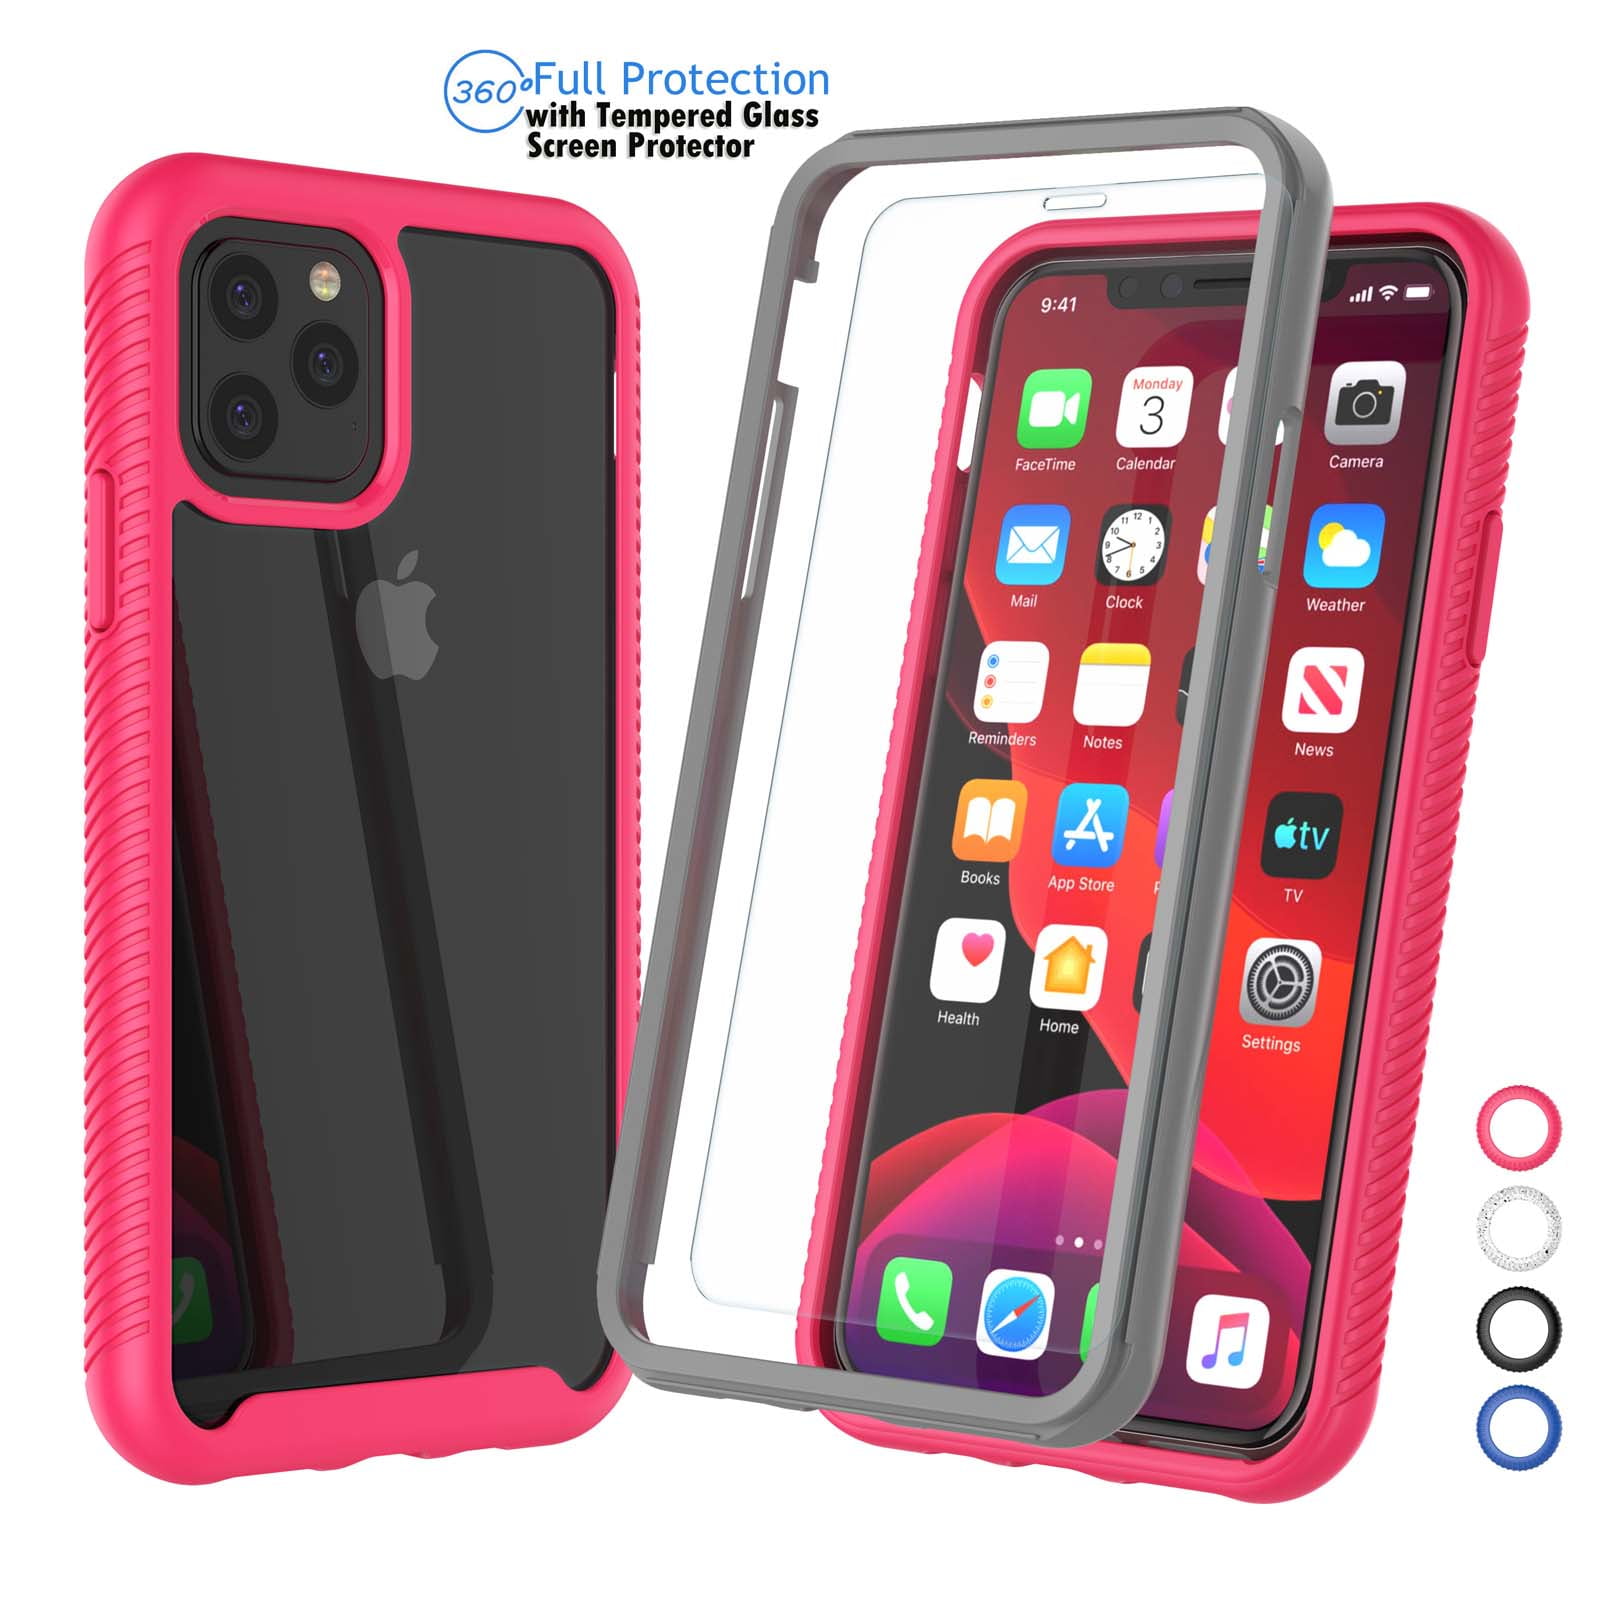 OtterBox Commuter Series Case for iPhone 11 Pro - Mint Way 